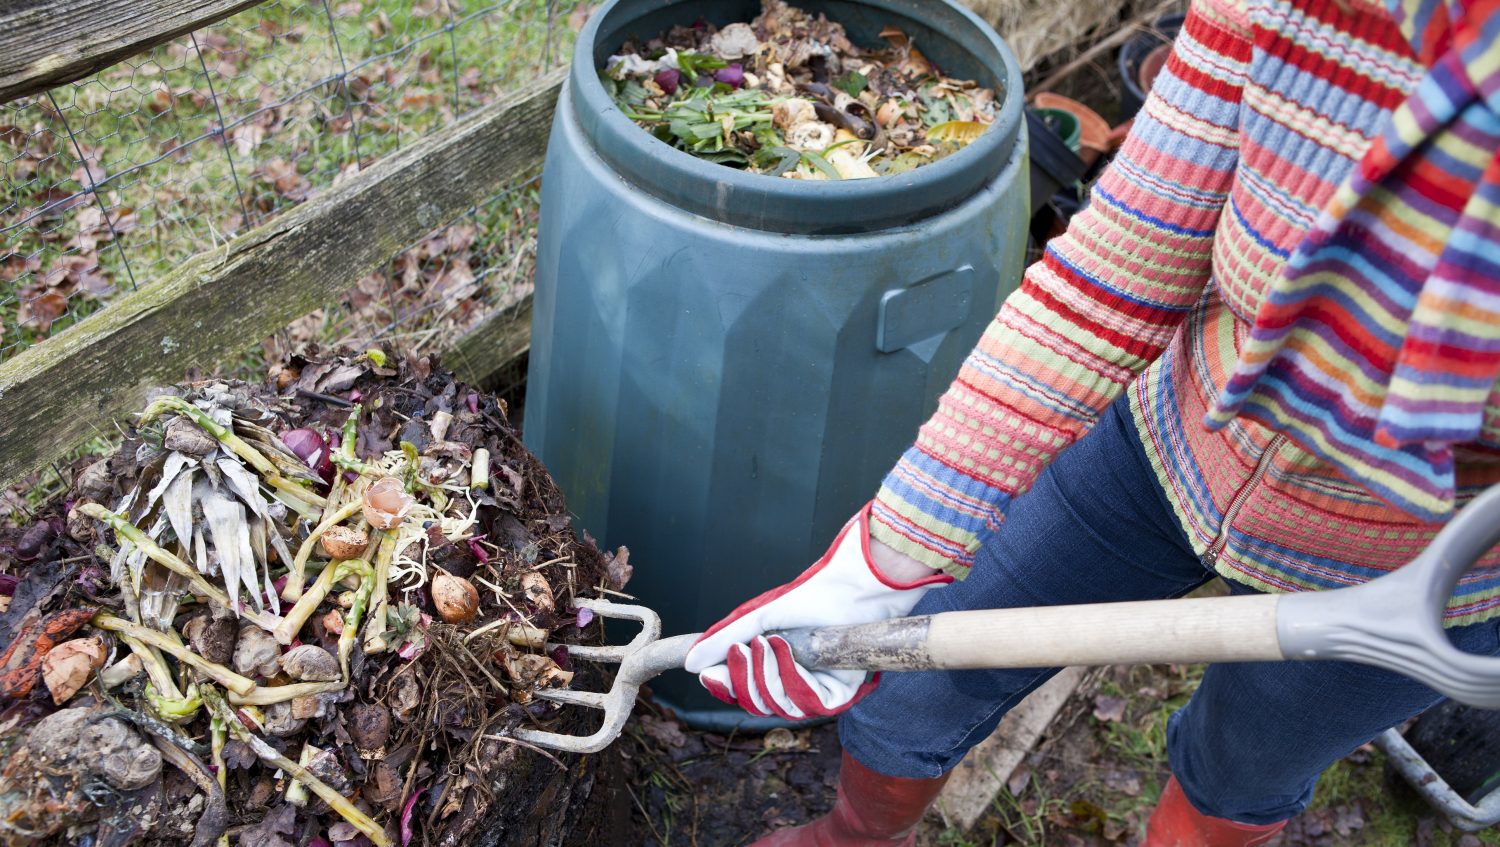 Woman gardener using garden fork to first remove uncomposted food waste from top of composting bin pile, before spreading the compost below onto a vegetable garden.